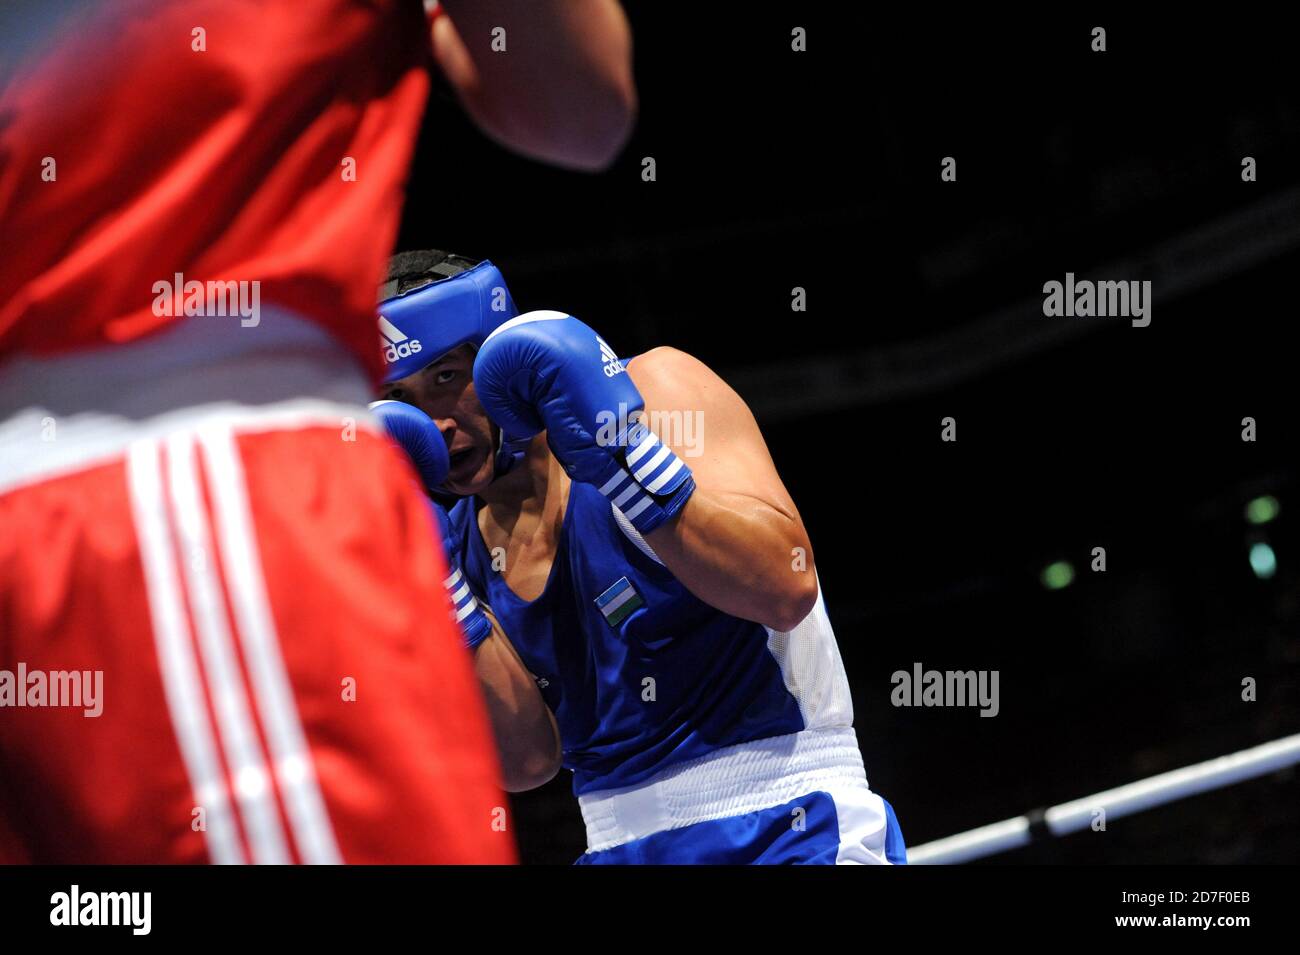 Boxers fighting during an amateur boxing match during the AIBA World Boxing Champioship in Milan 2009. Stock Photo